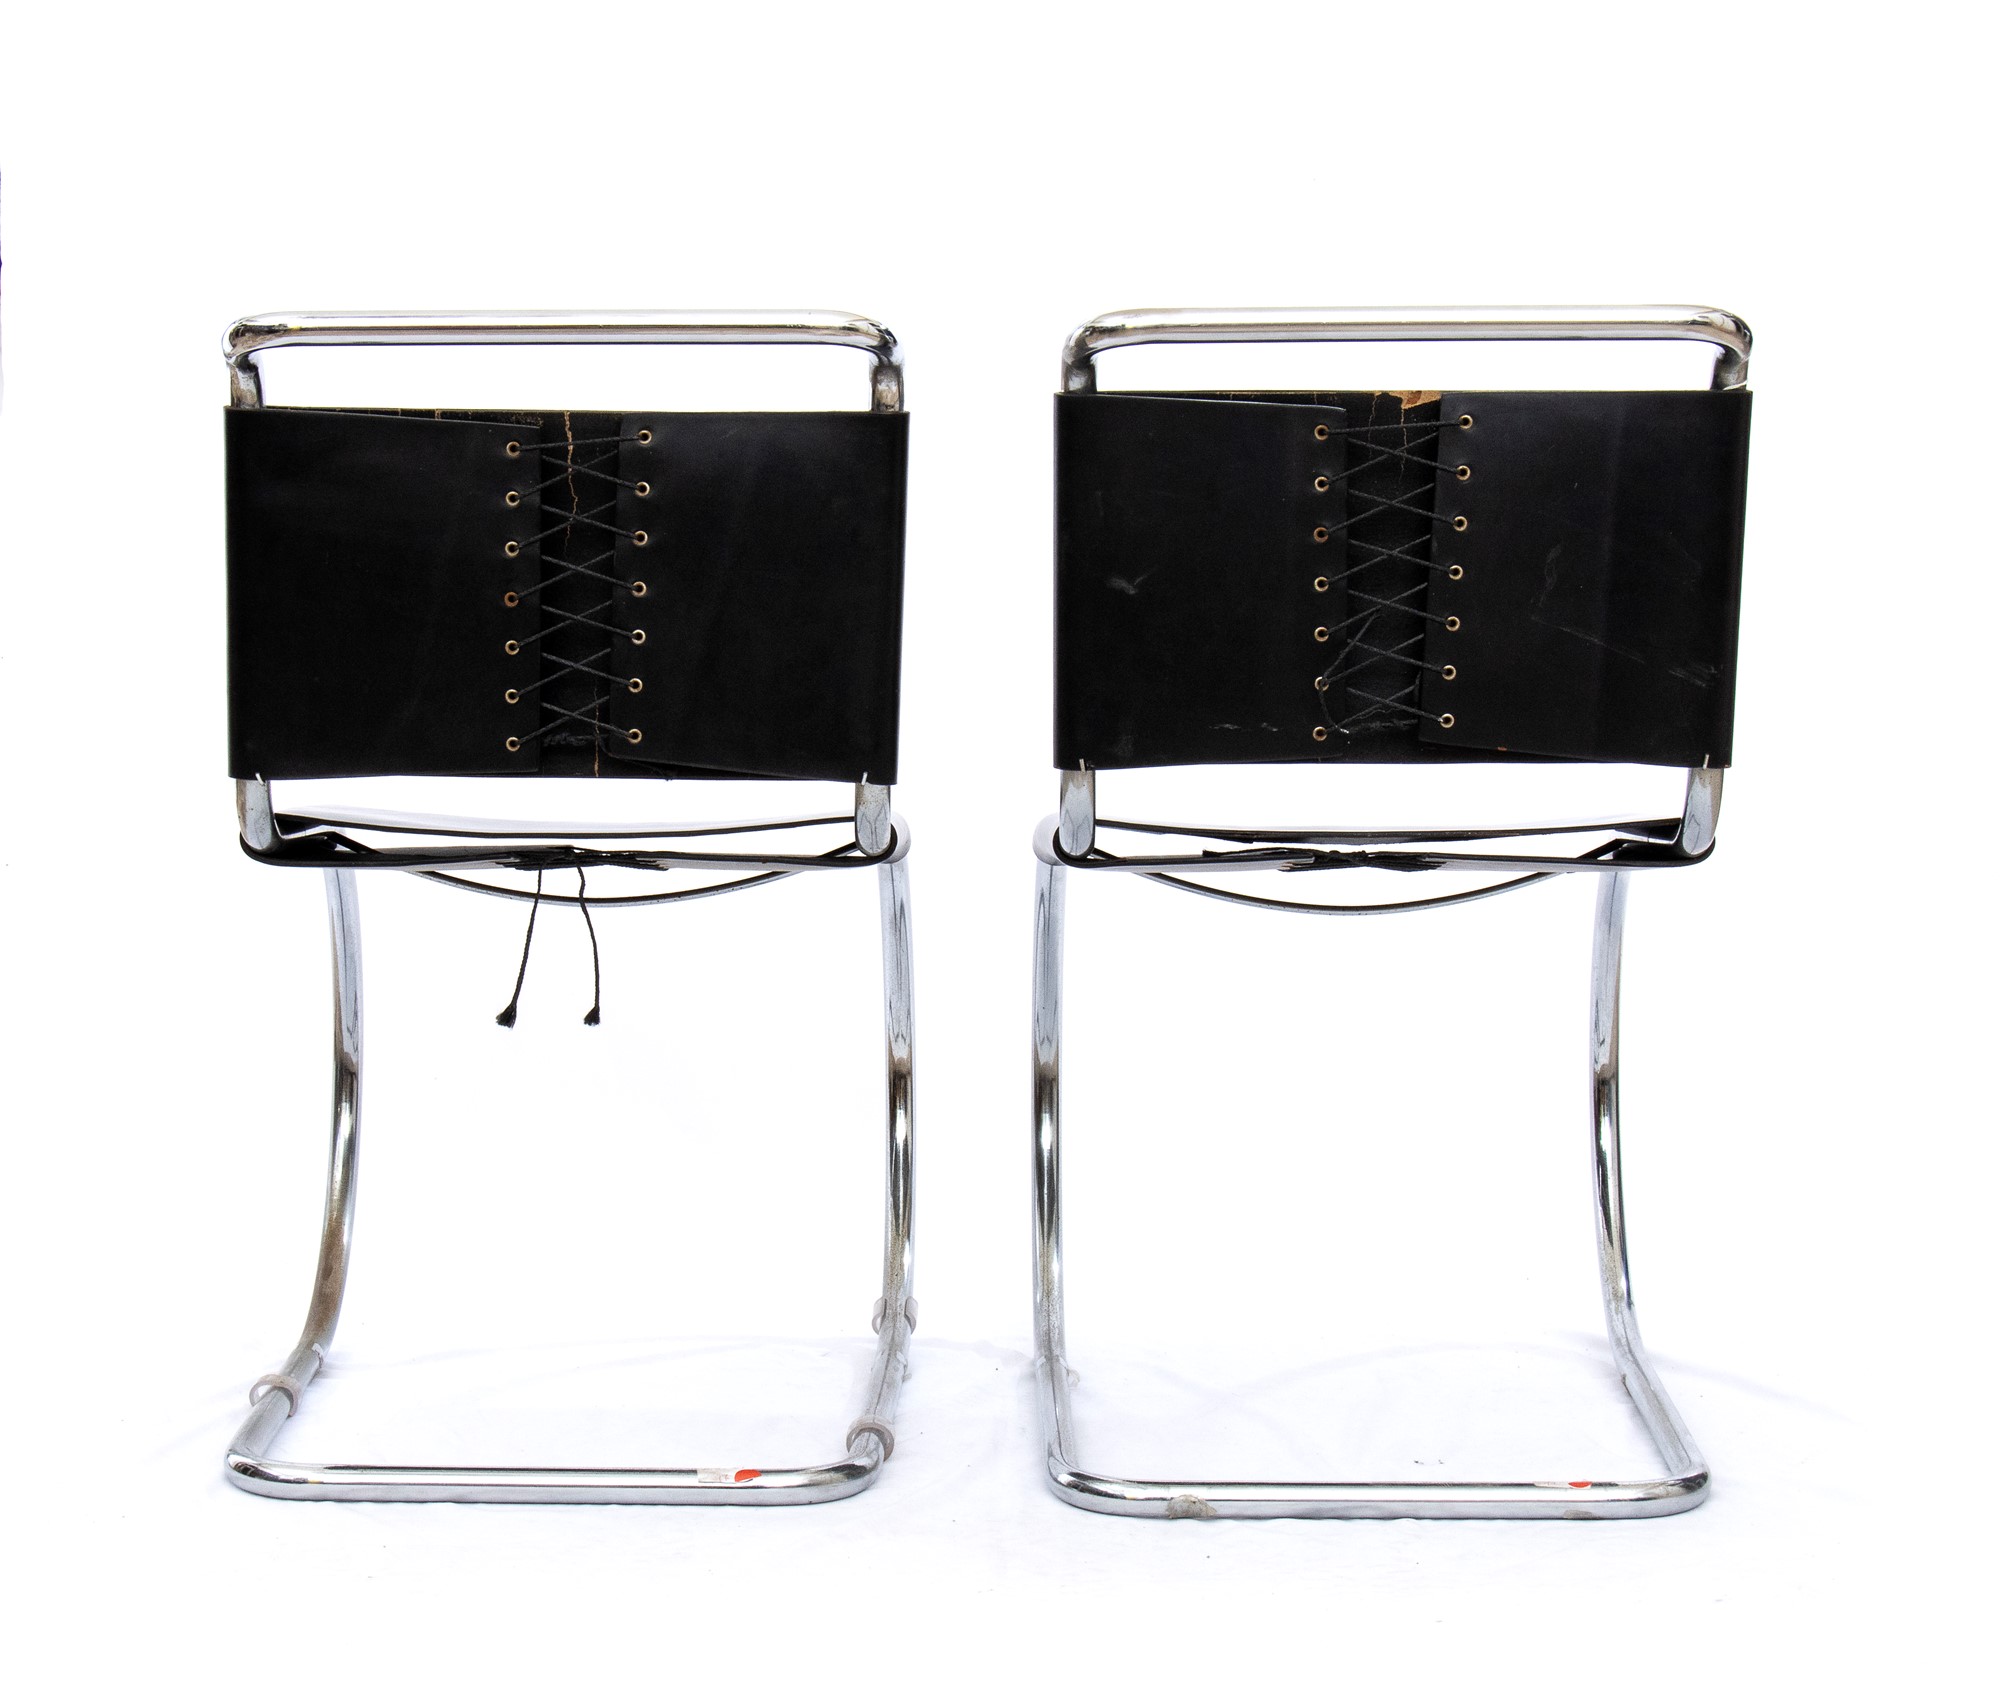 2 chairs in black leather and steel designed by Mart Stam and Marcer Beuer - Image 12 of 19